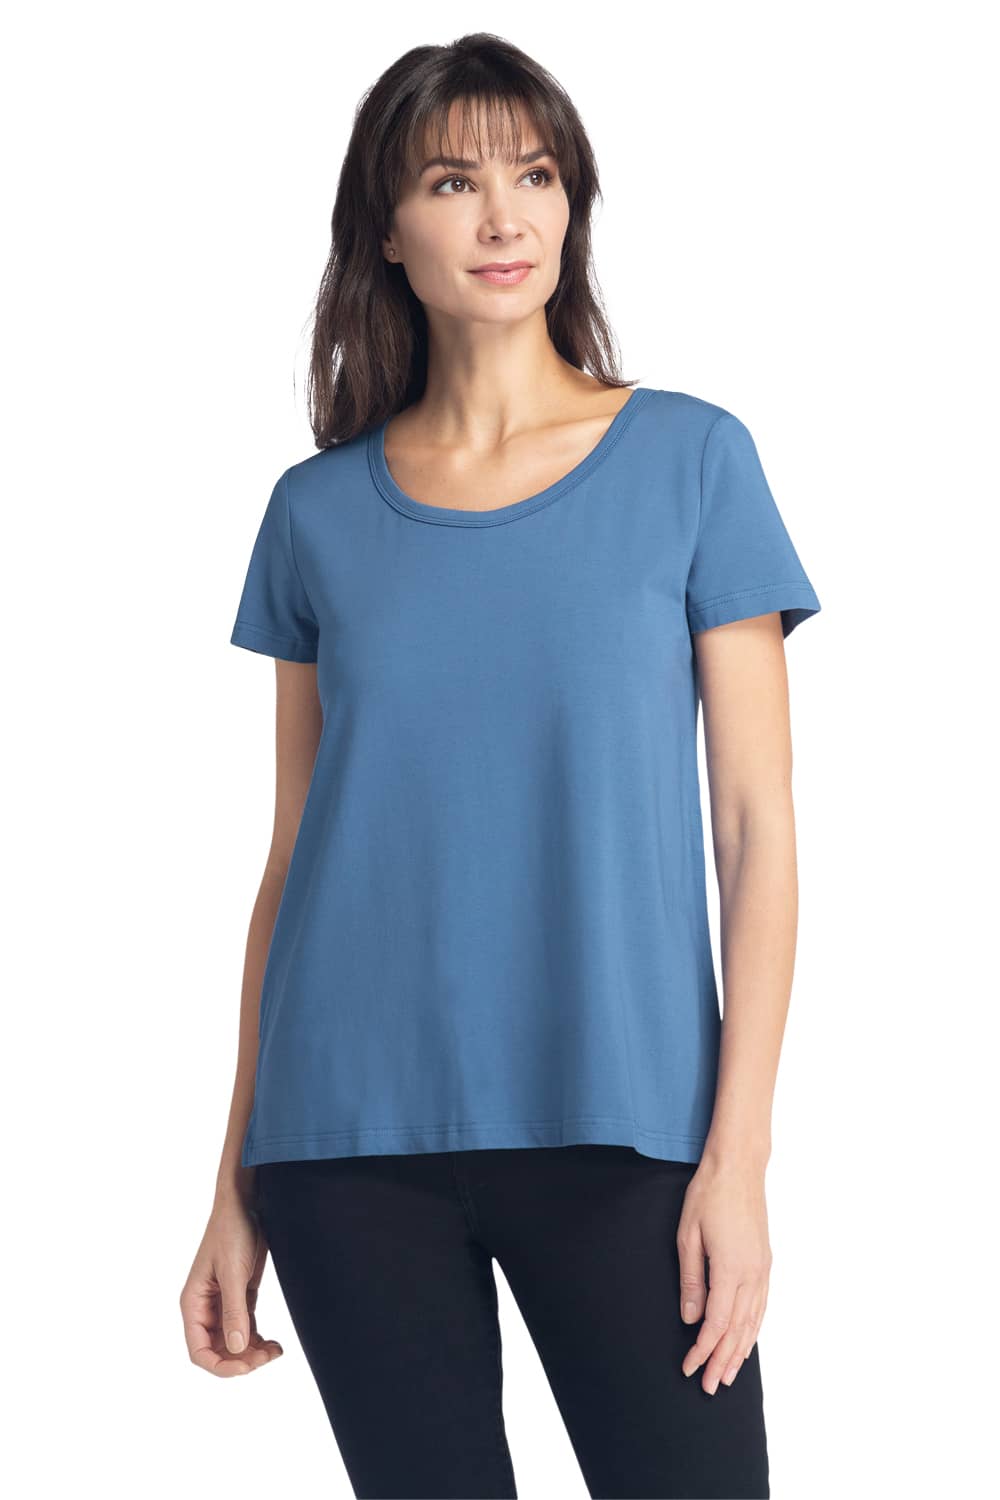 Women's Relaxed EcoFabric™ Scoop Neck Tee Womens>Casual>Top Fishers Finery Moonlight Blue X-Small 